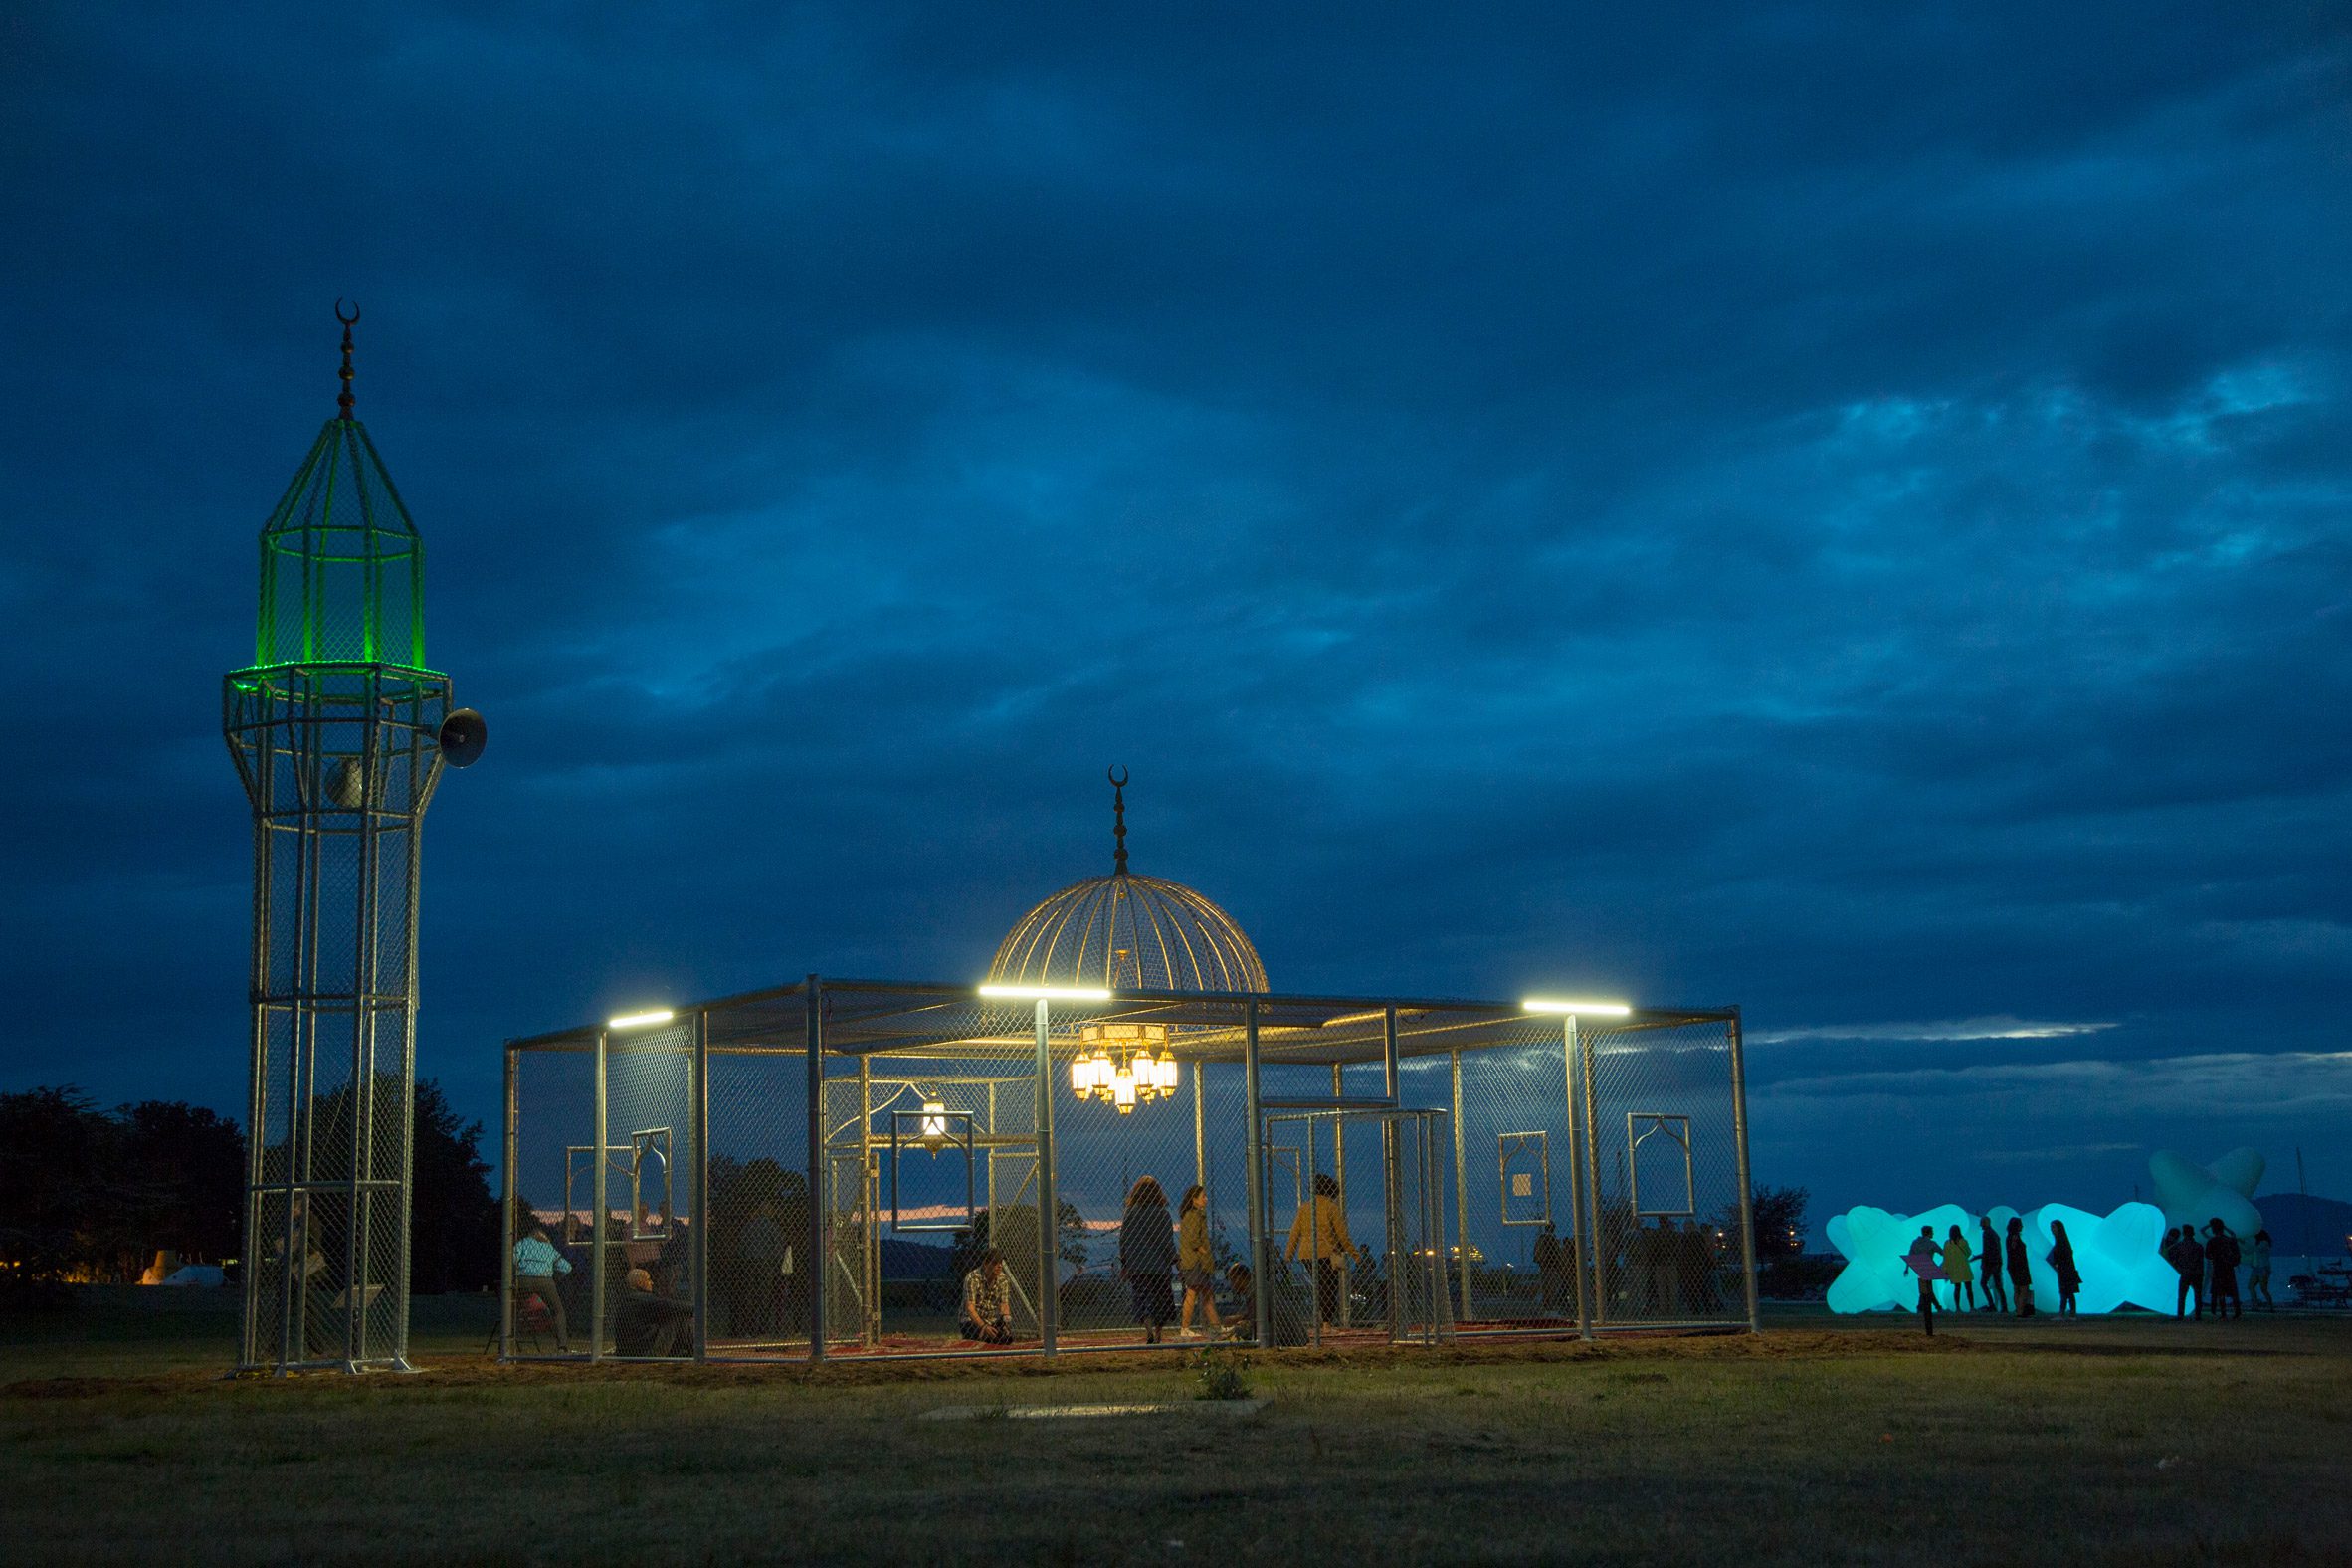 The steel mosque installation at dusk, with the minaret lit in green